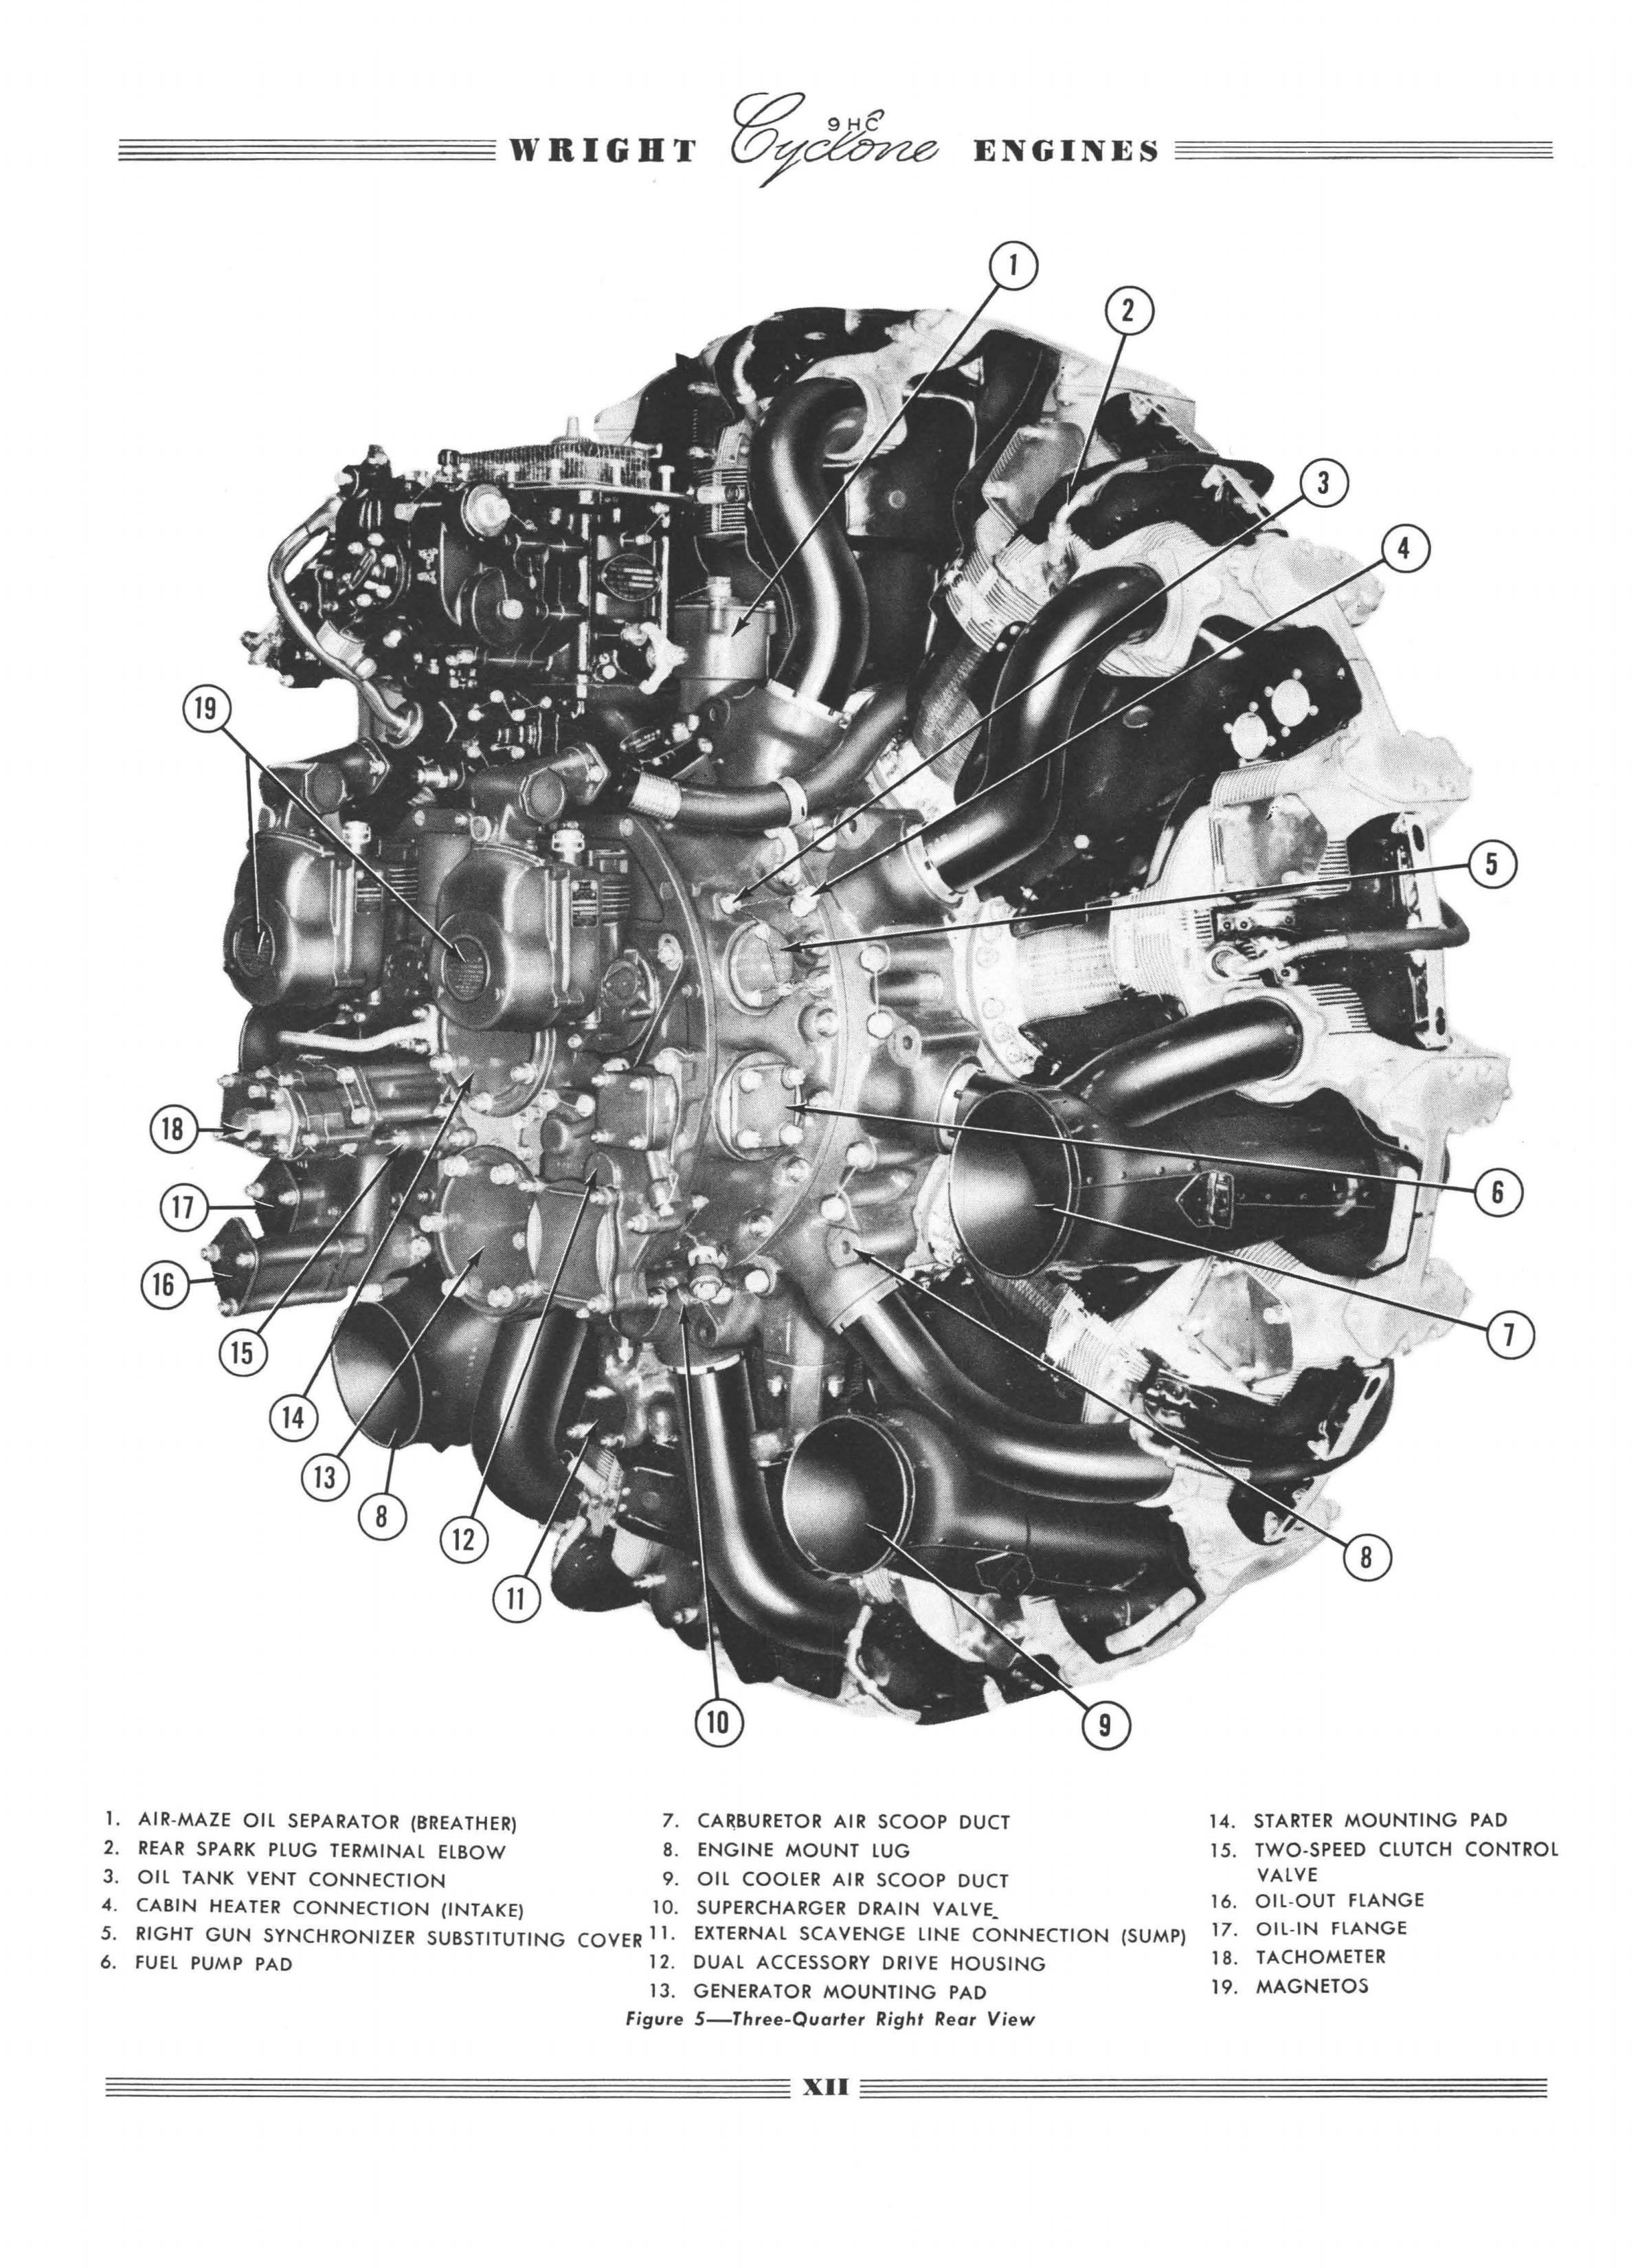 Sample page 16 from AirCorps Library document: Service Manual for Wright Cyclone Engines Series 9HC